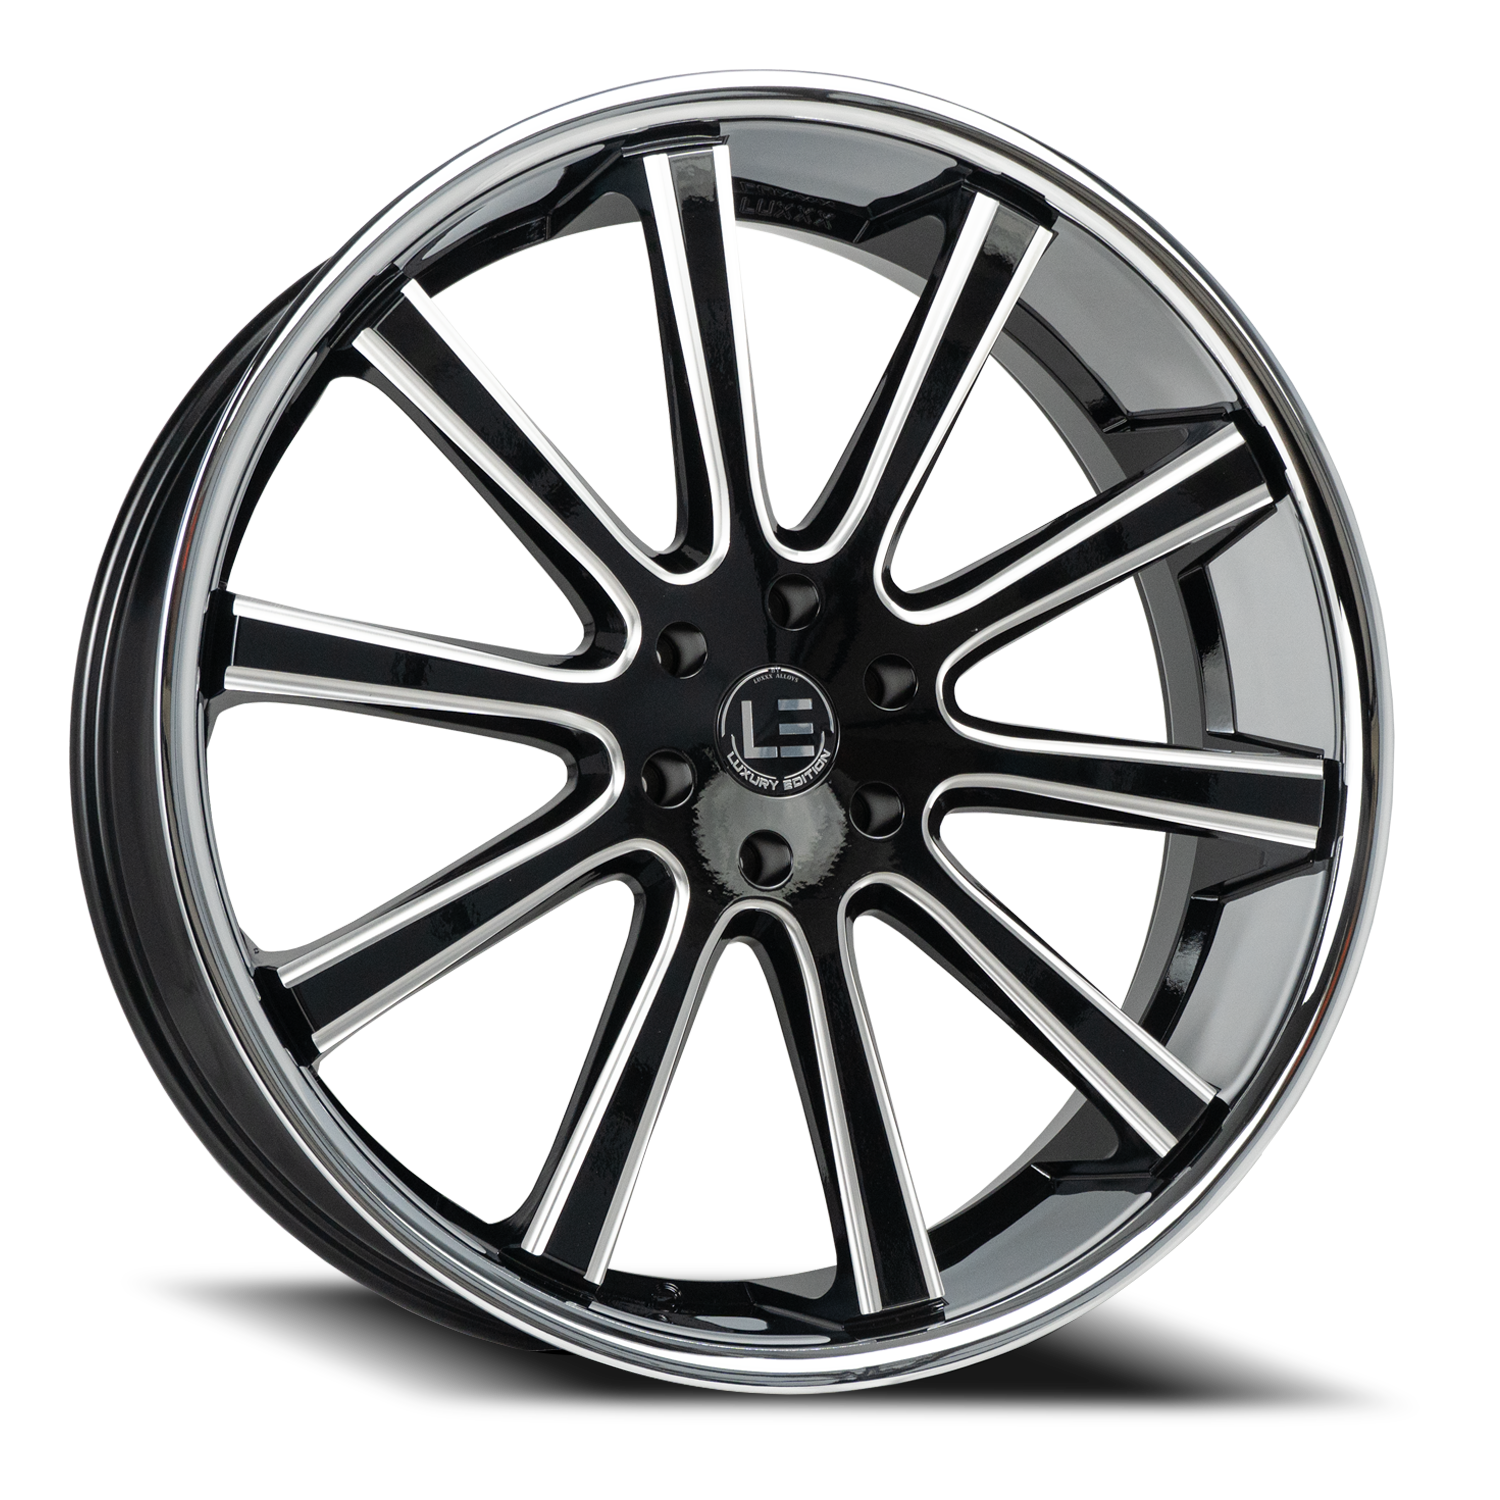 https://storage.googleapis.com/autosync-wheels/Luxxx_LE/13-GB_Gloss_Black_Milled-Stainless-Steel-Lip_5-lug_0001.png